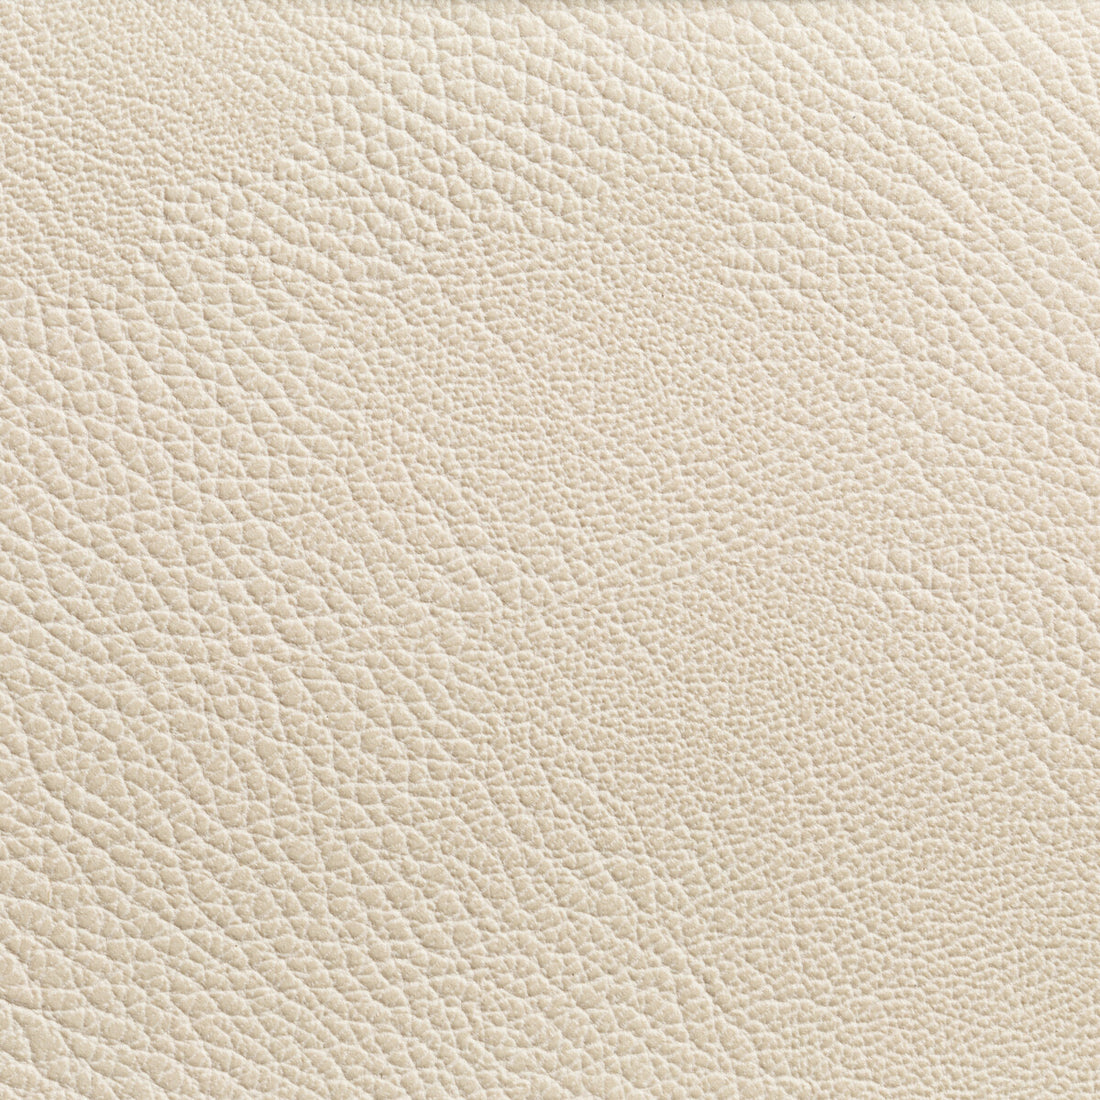 Rustler fabric in gypsum color - pattern RUSTLER.111.0 - by Kravet Contract in the Foundations / Value collection